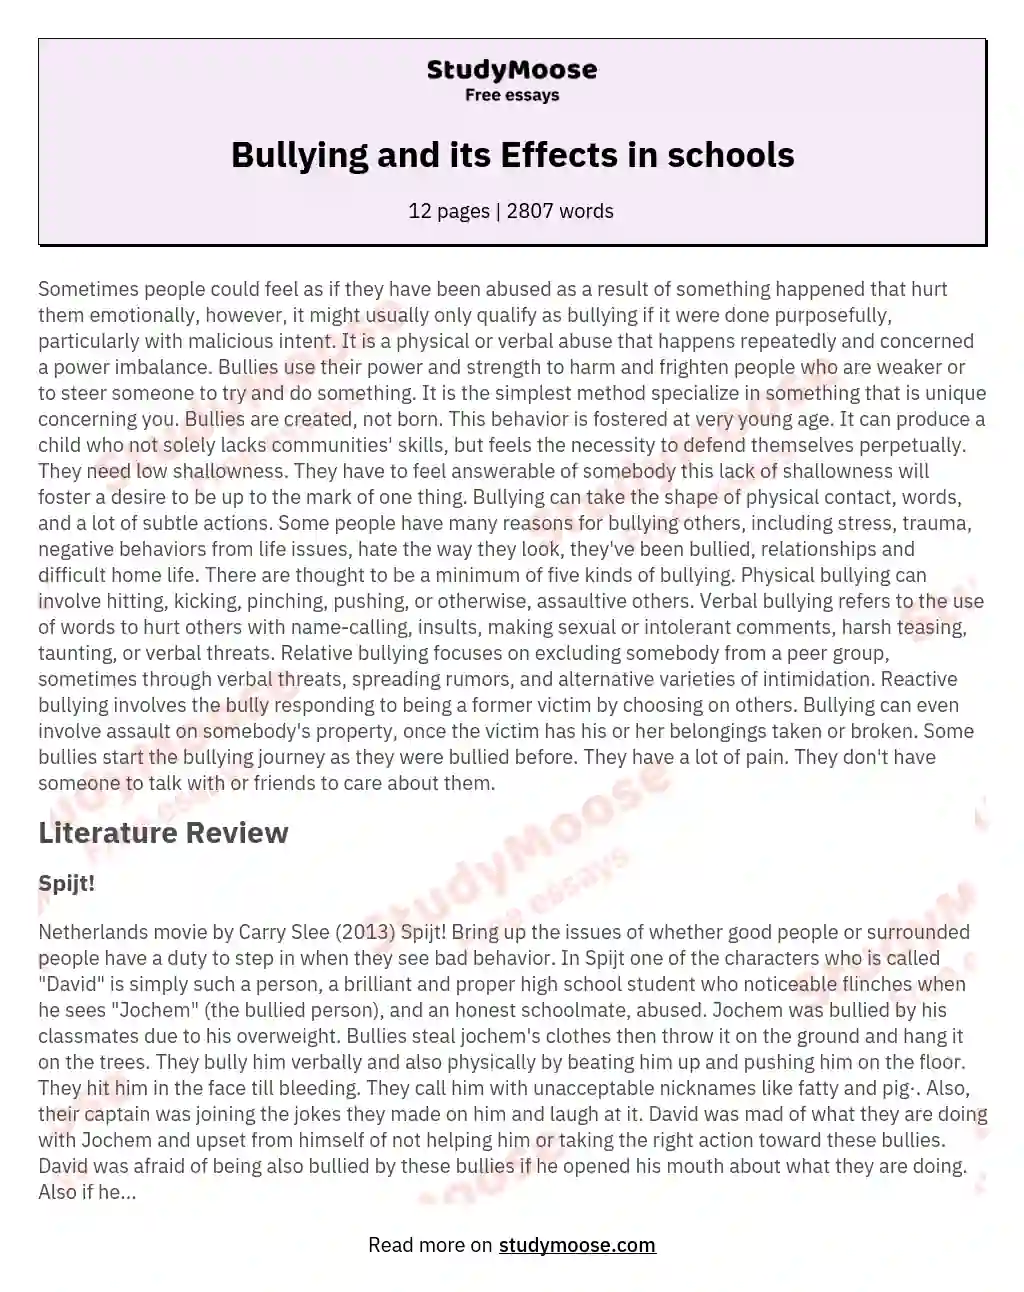 Bullying and its Effects in schools essay